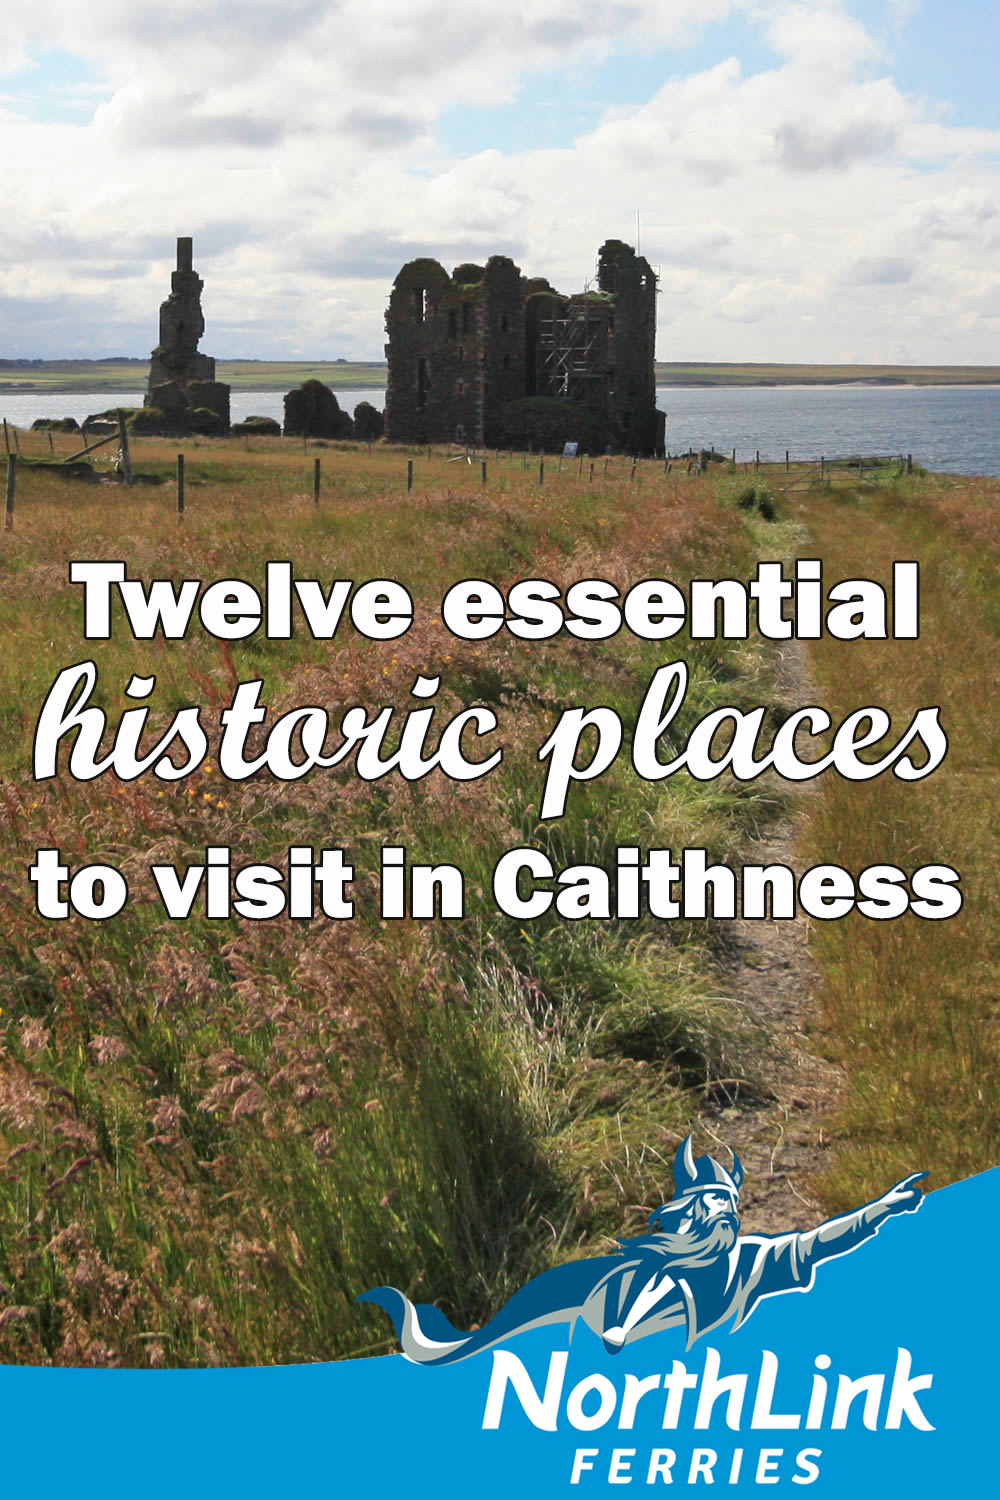 Twelve essential historical places to visit in Caithness